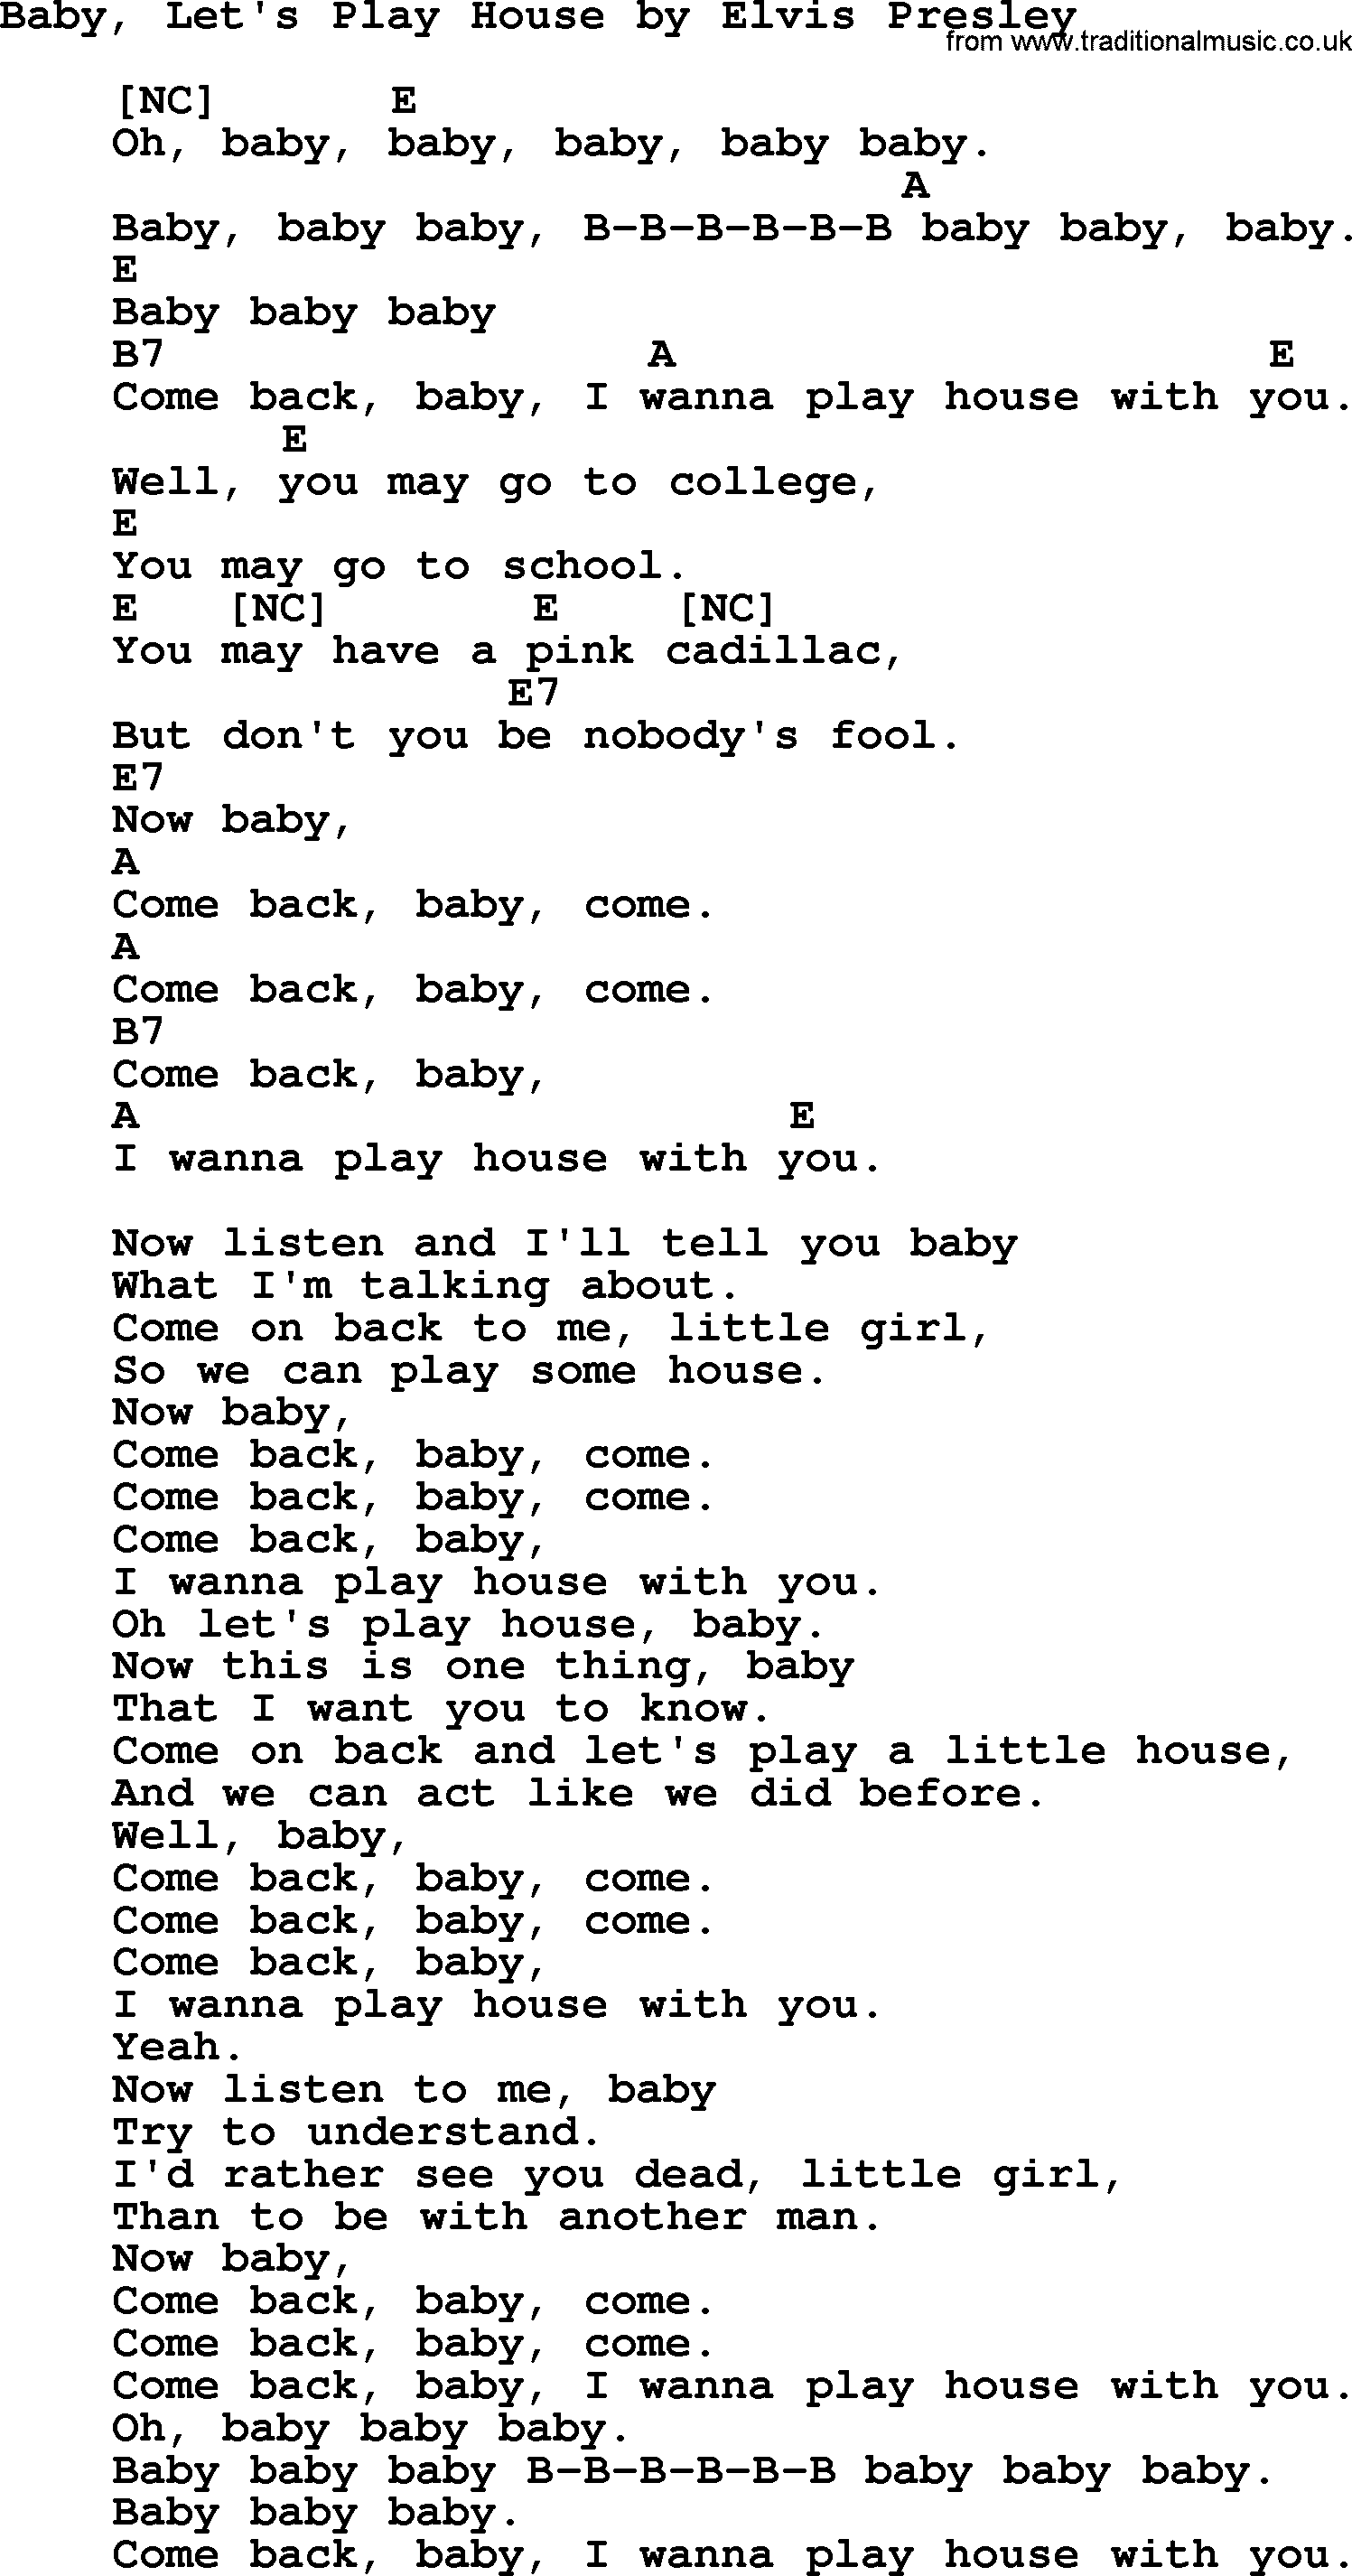 Elvis Presley song: Baby, Let's Play House, lyrics and chords